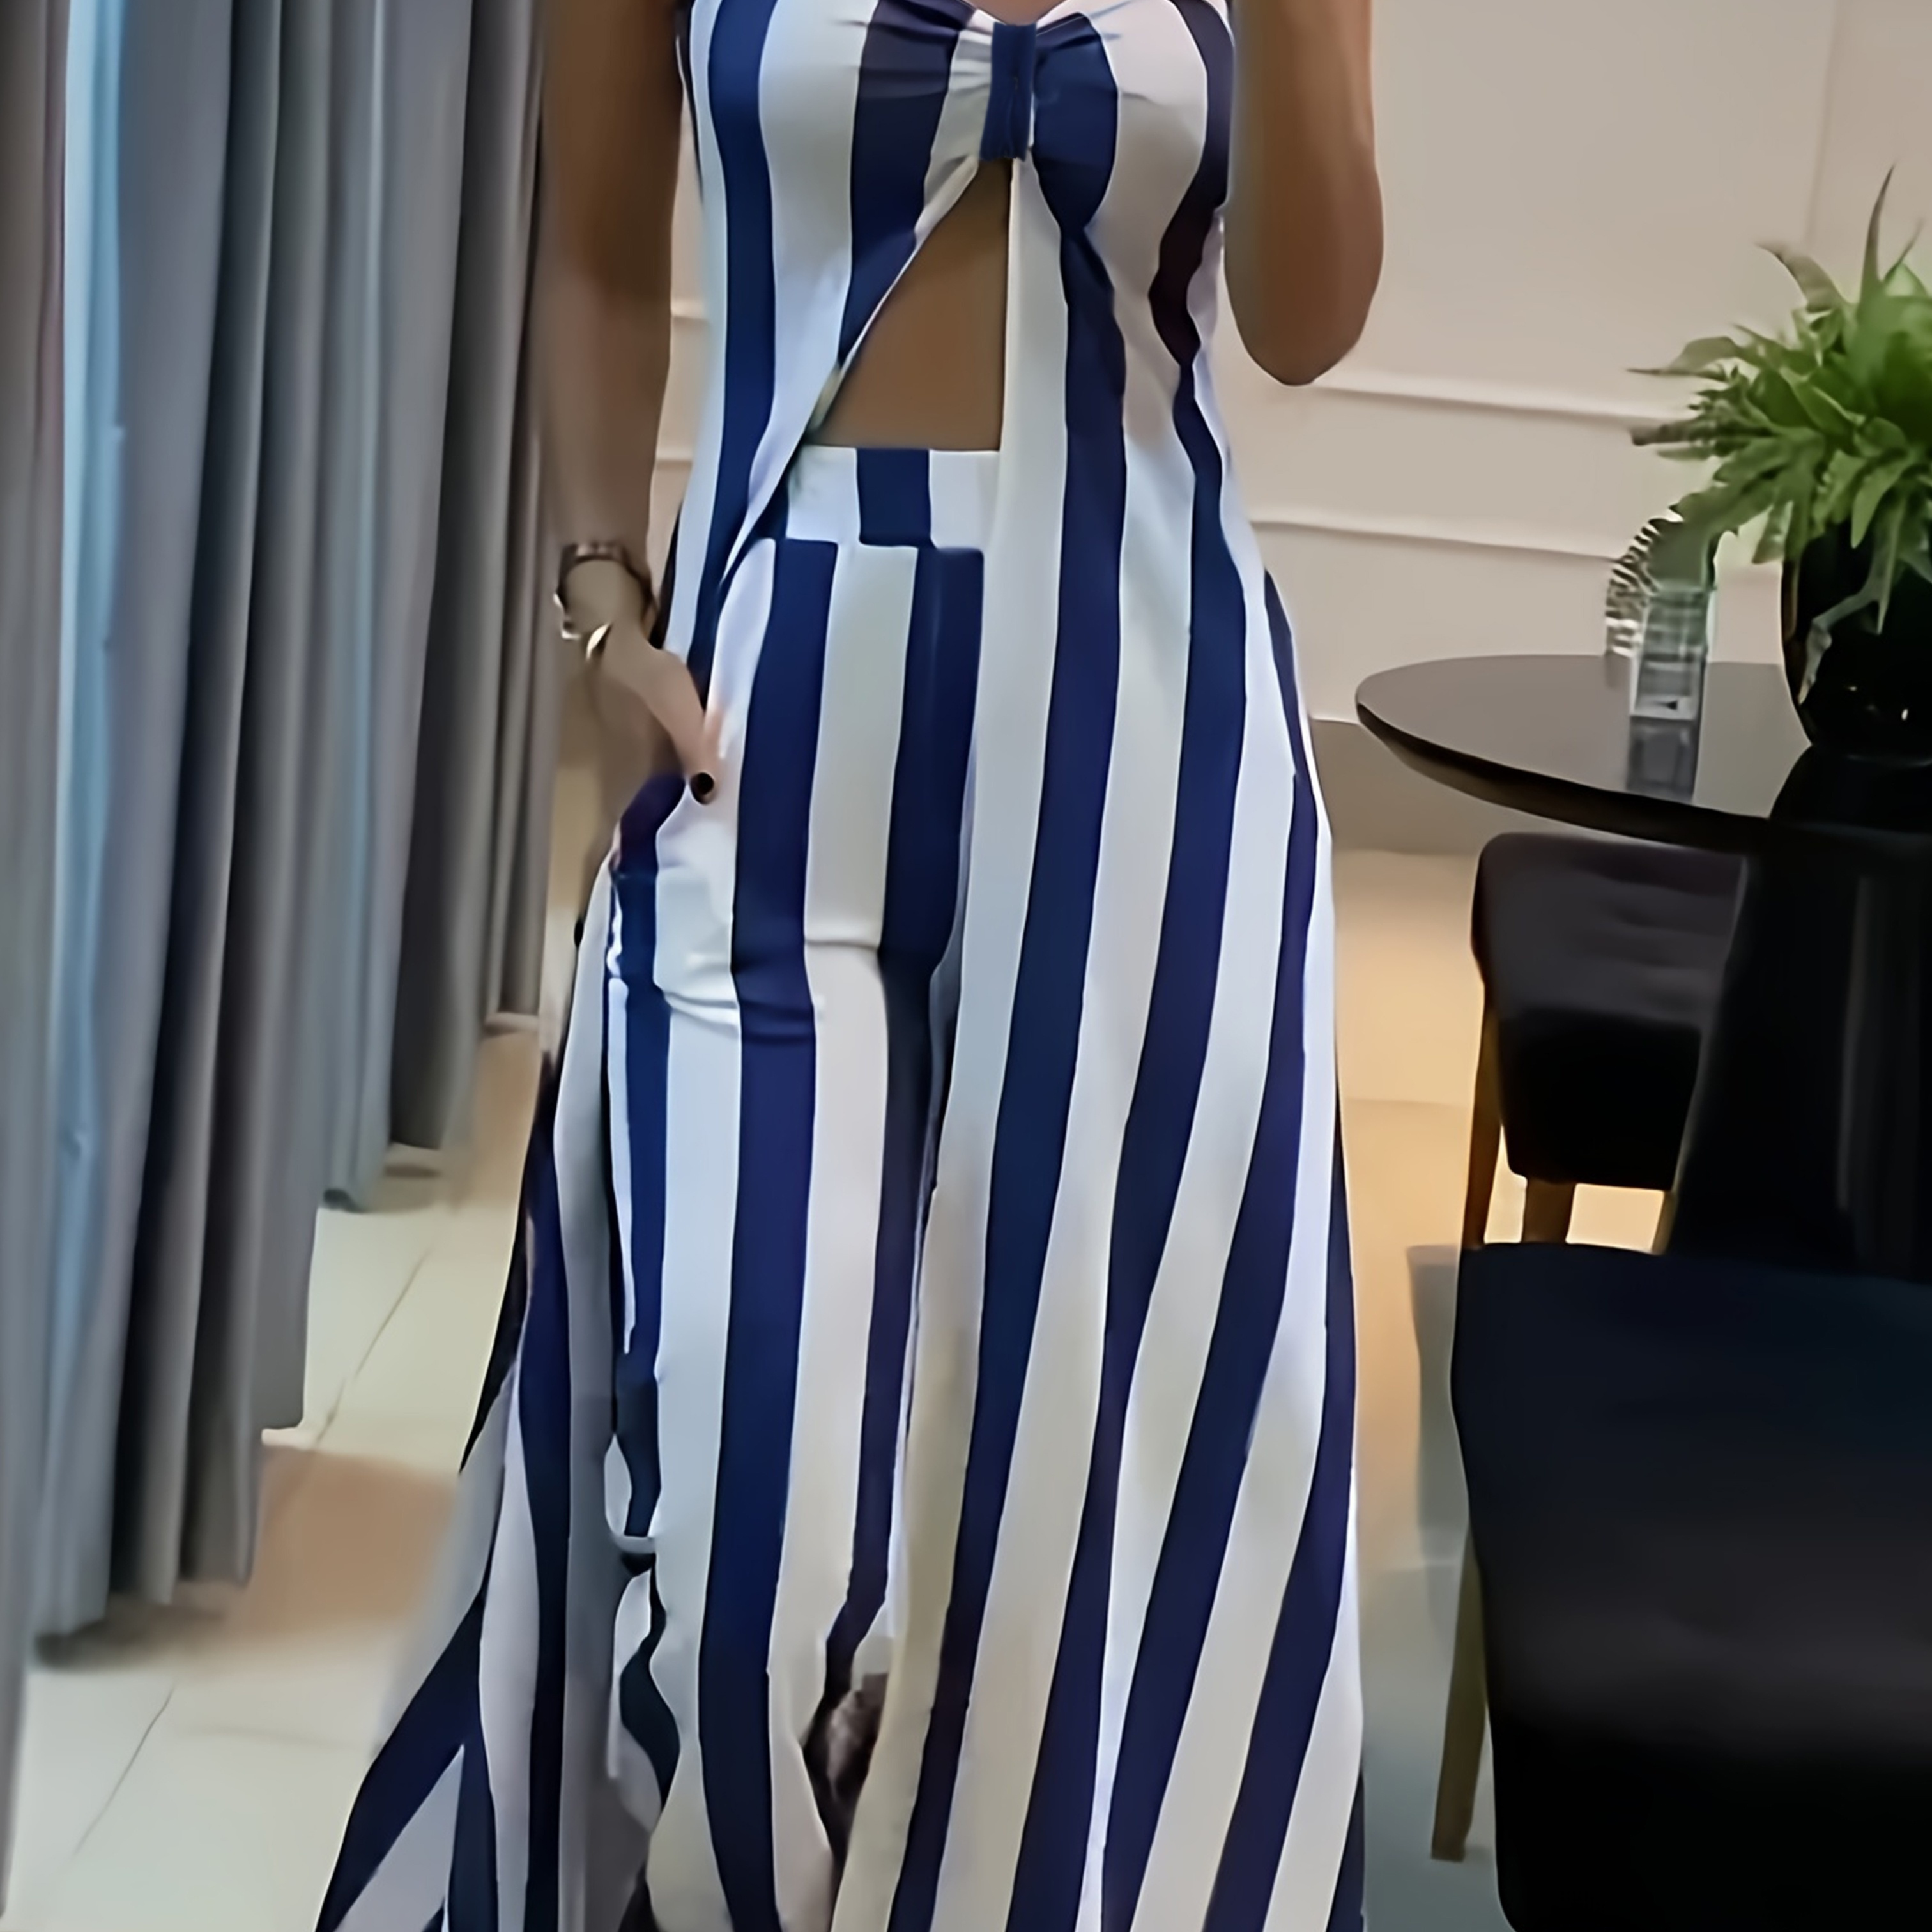 

Stripe Print Elegant 2 Piece Set, Midi Length Ruched Split Tank Top & High Waist Pants Outfits For Spring & Summer, Women's Clothing